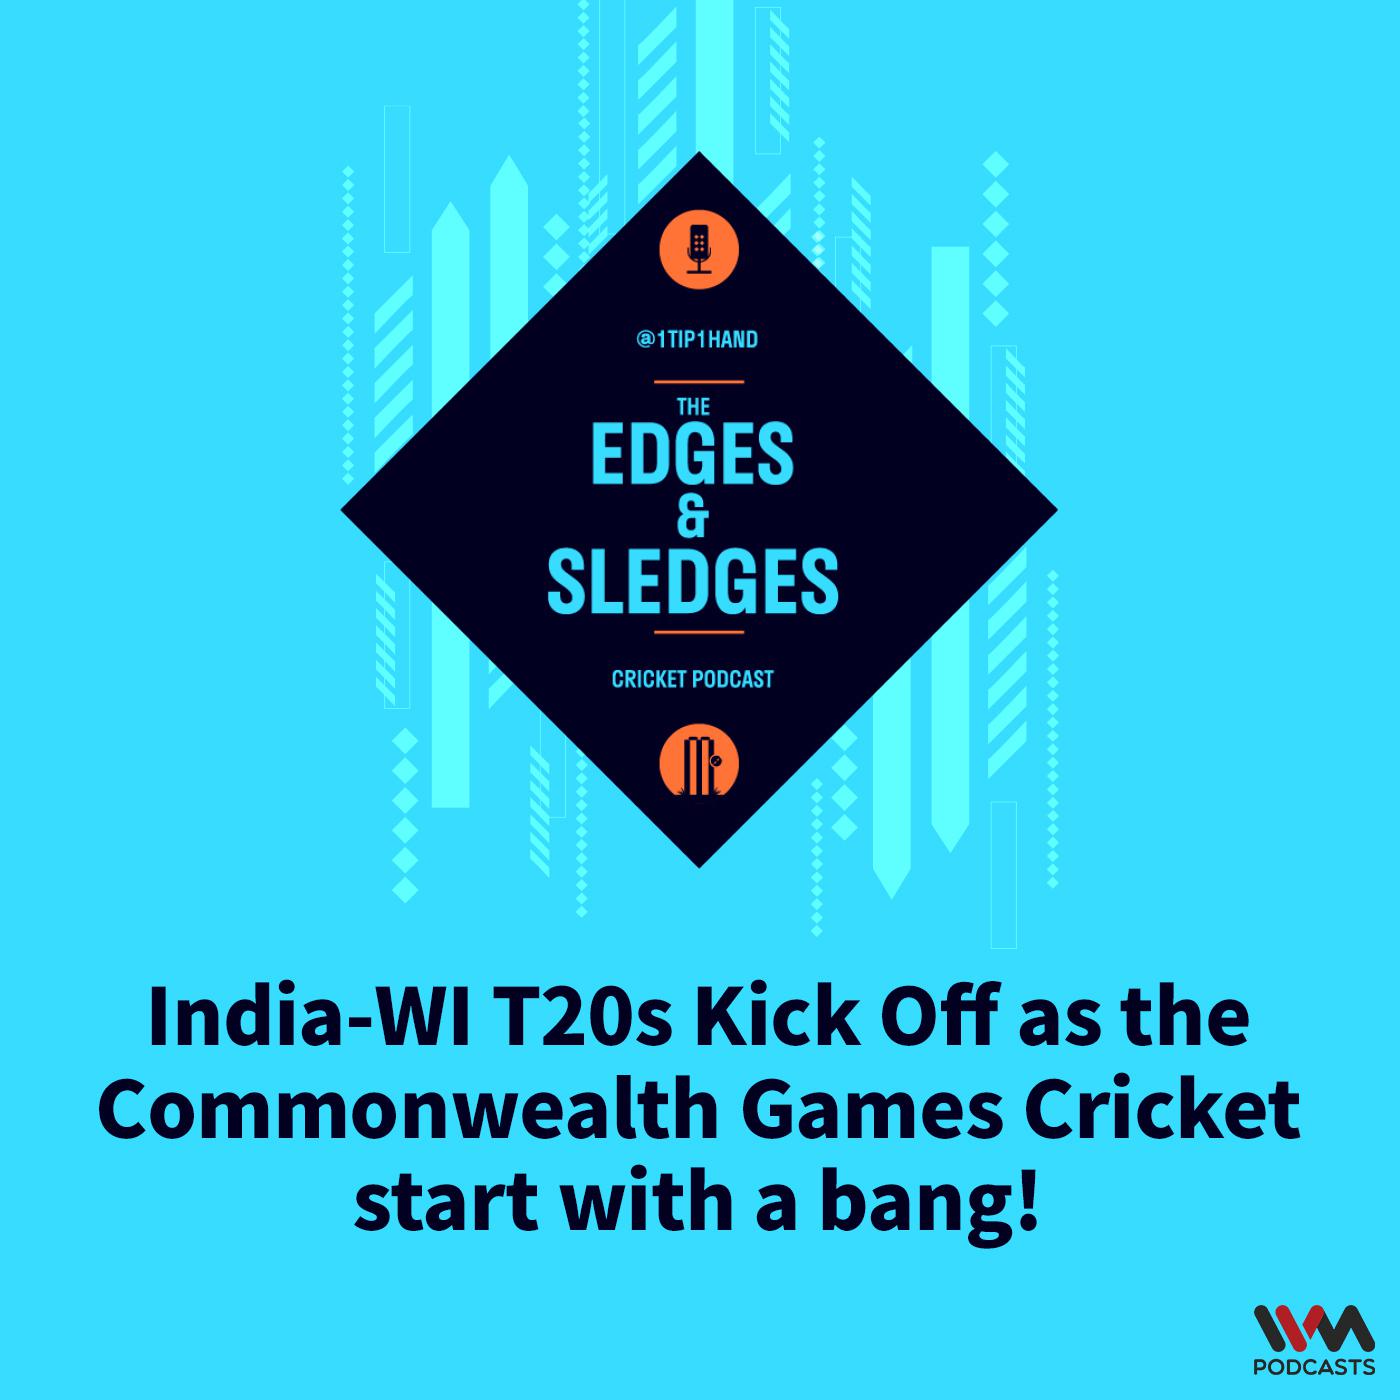 India-WI T20s Kick Off as the Commonwealth Games Cricket start with a bang!